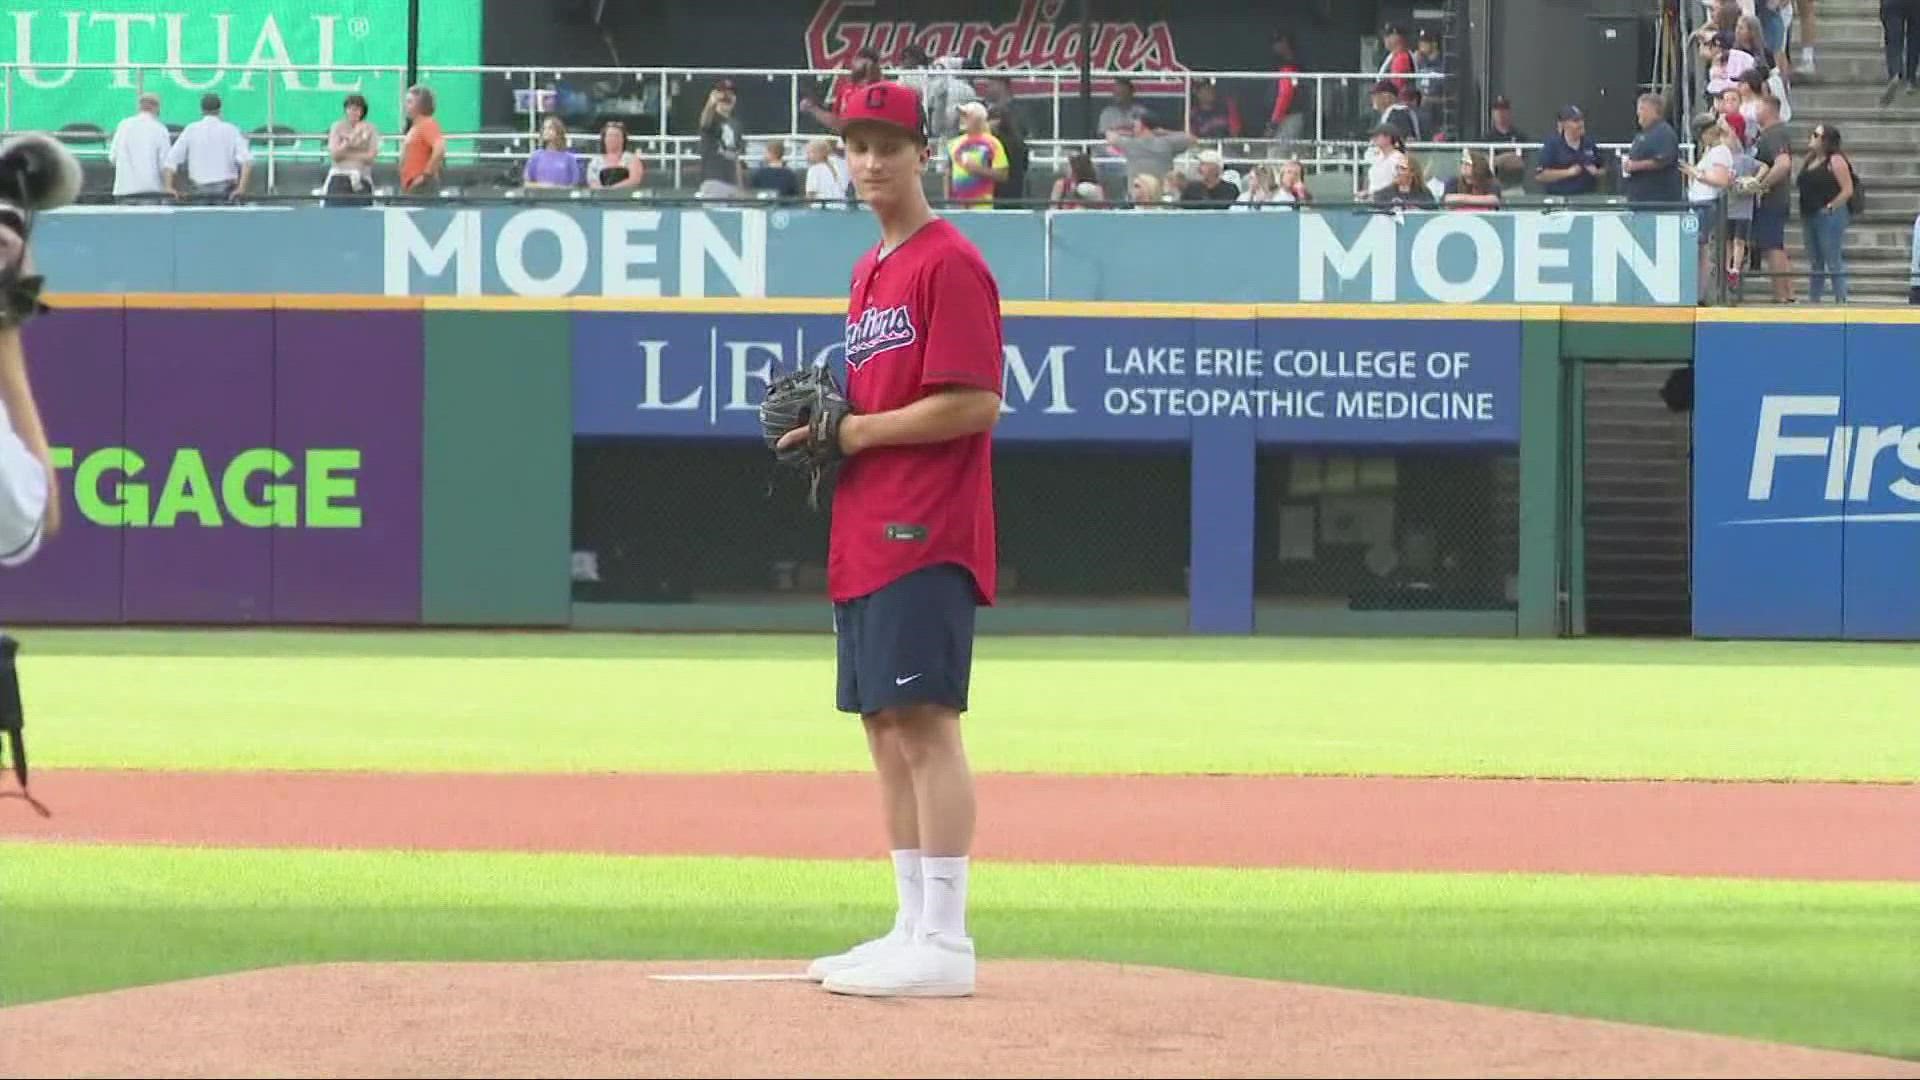 St. Ignatius student Robbie Boyce, who went through a grueling recovery after suffering a stroke, threw the first pitch at tonight's Cleveland Guardians game.